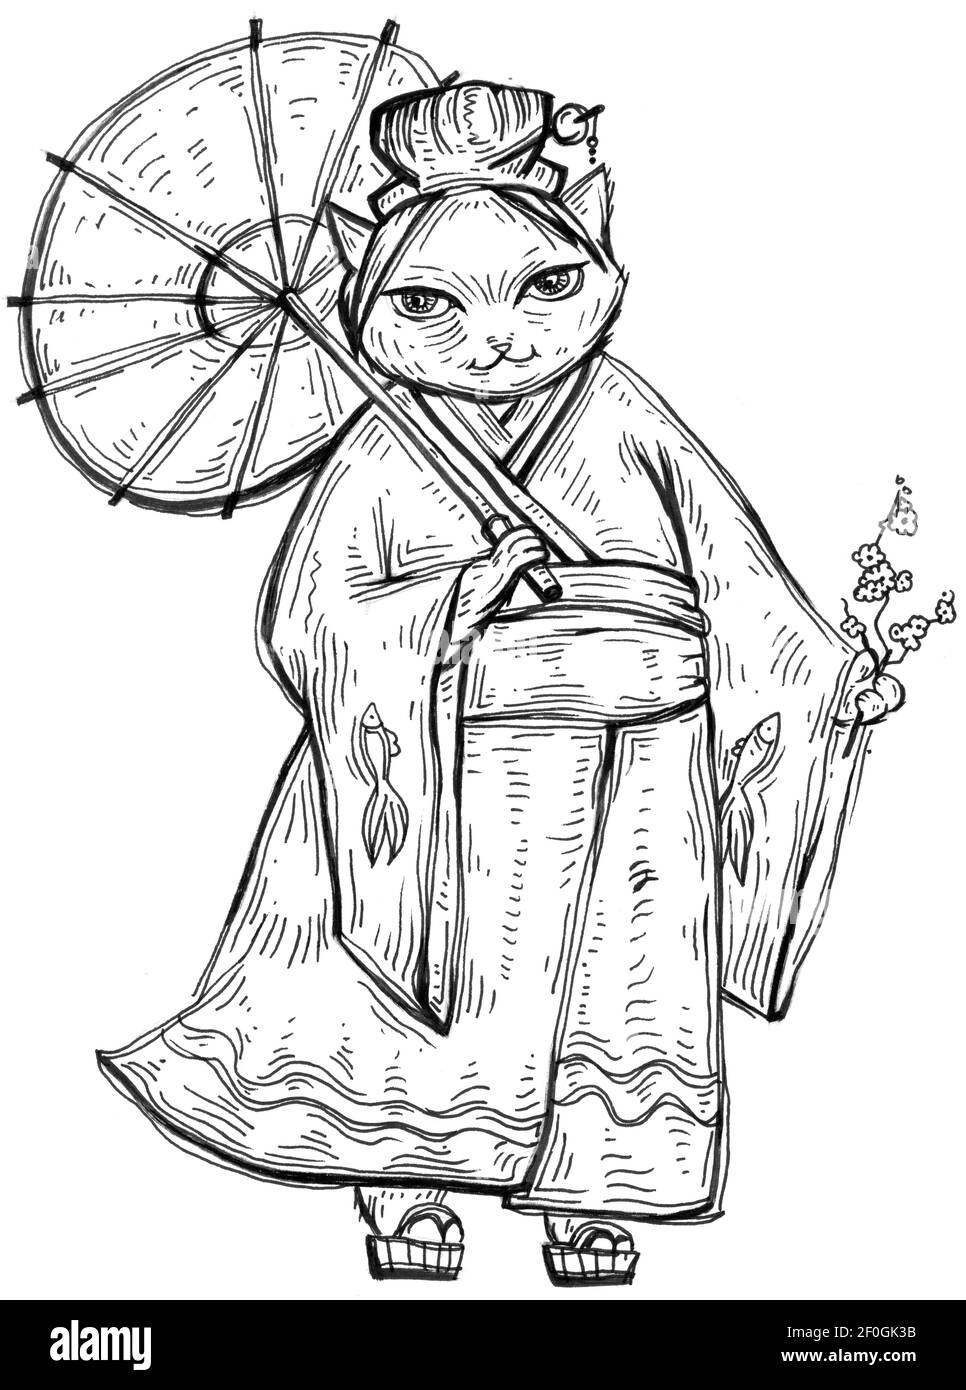 Cat dressed in kimono with umbrella. Vintage monochrome hatching illustration isolated on white background. Hand drawn design for t-shirt Stock Photo